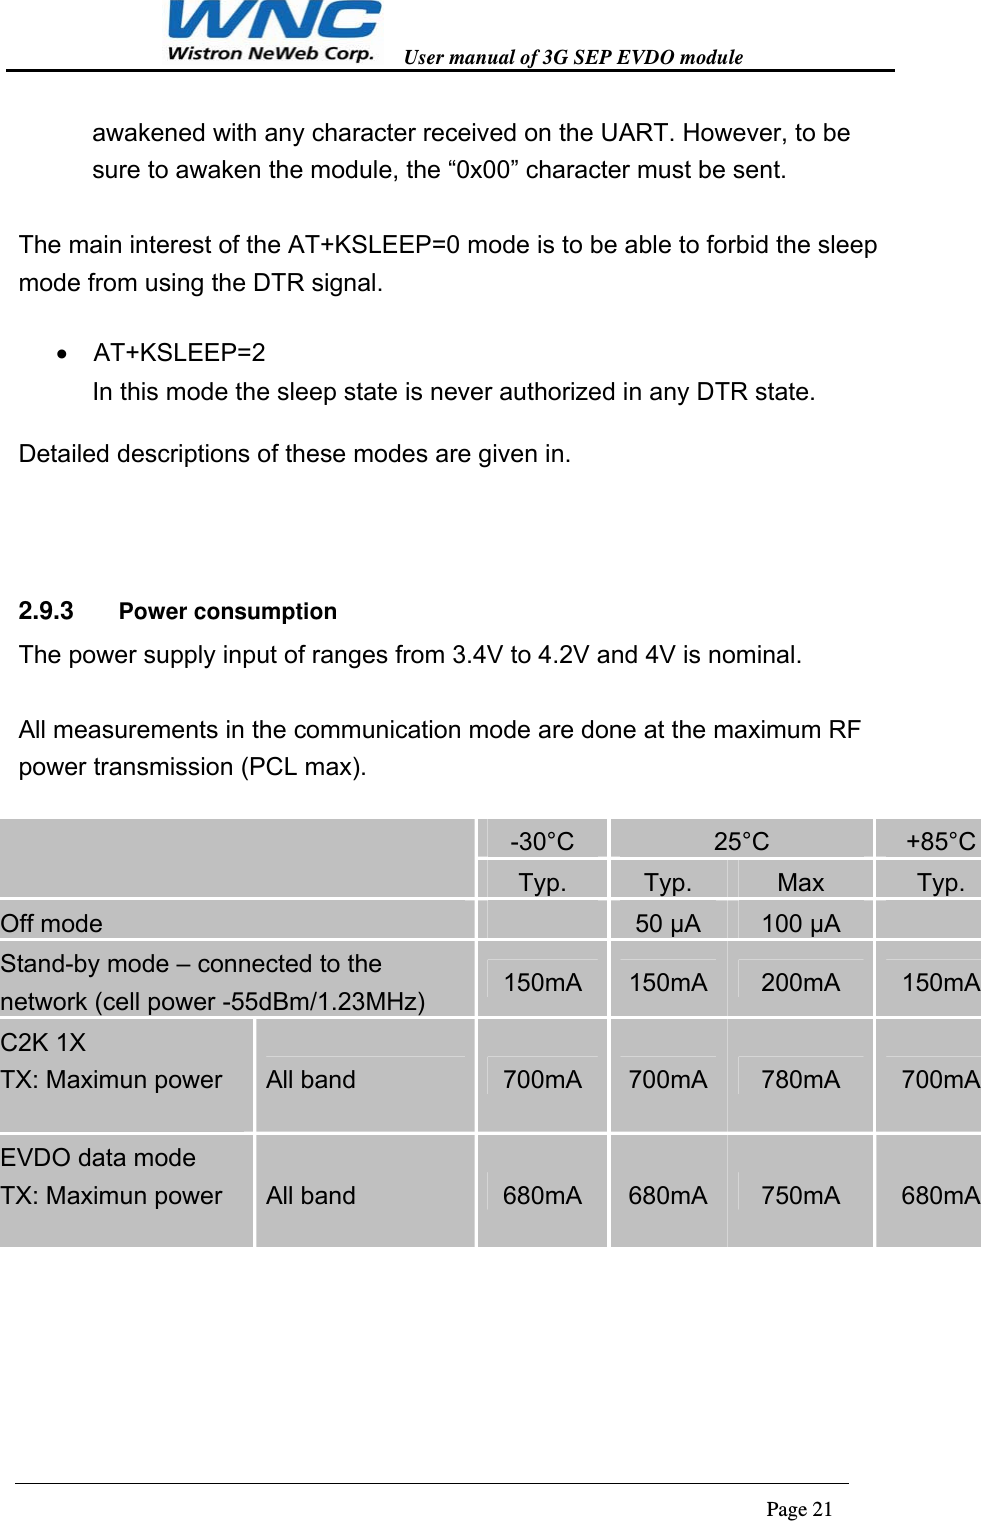   User manual of 3G SEP EVDO module                                                                      Page 21  awakened with any character received on the UART. However, to be sure to awaken the module, the “0x00” character must be sent.  The main interest of the AT+KSLEEP=0 mode is to be able to forbid the sleep mode from using the DTR signal.   AT+KSLEEP=2 In this mode the sleep state is never authorized in any DTR state.   Detailed descriptions of these modes are given in.  2.9.3  Power consumption The power supply input of ranges from 3.4V to 4.2V and 4V is nominal.    All measurements in the communication mode are done at the maximum RF power transmission (PCL max).   -30°C  25°C  +85°C Typ.  Typ.  Max  Typ. Off mode   50 µA  100 µA   Stand-by mode – connected to the network (cell power -55dBm/1.23MHz)  150mA  150mA  200mA  150mA C2K 1X TX: Maximun power  All band  700mA  700mA  780mA  700mA EVDO data mode TX: Maximun power  All band  680mA  680mA  750mA  680mA   